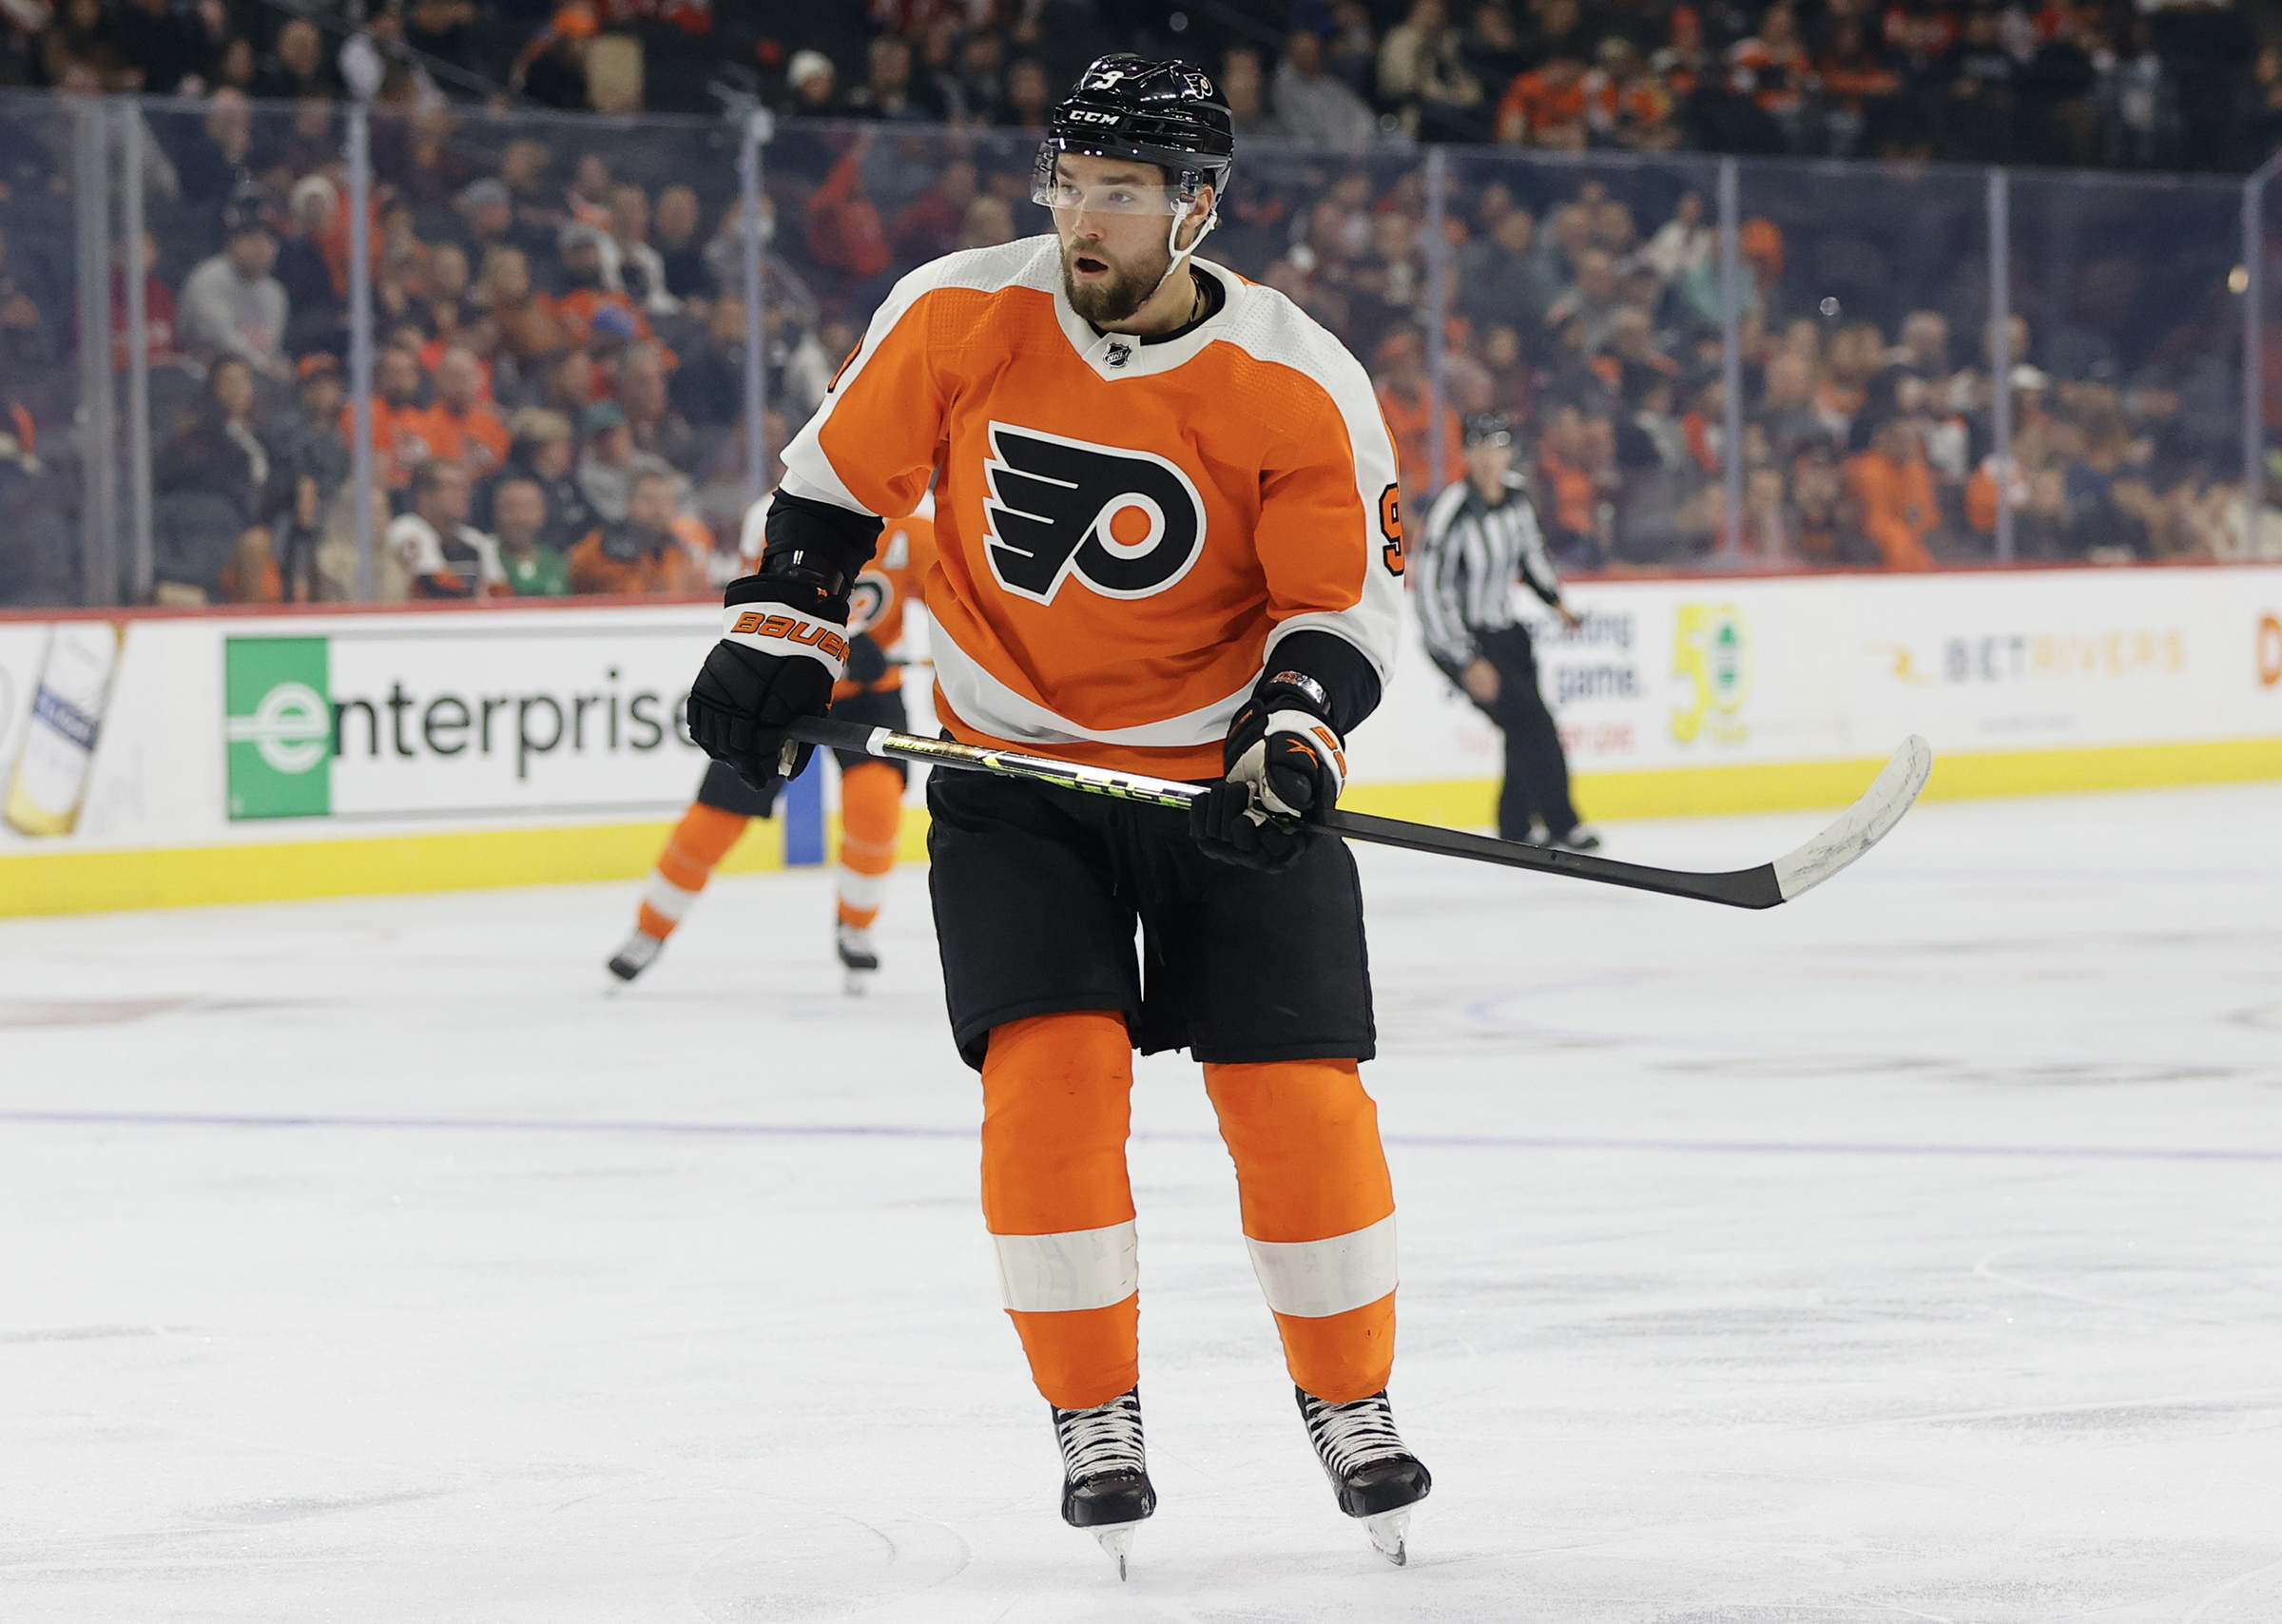 Ivan Provorov jerseys sell out days after NHL player refuses to wear LGBT  pride jersey